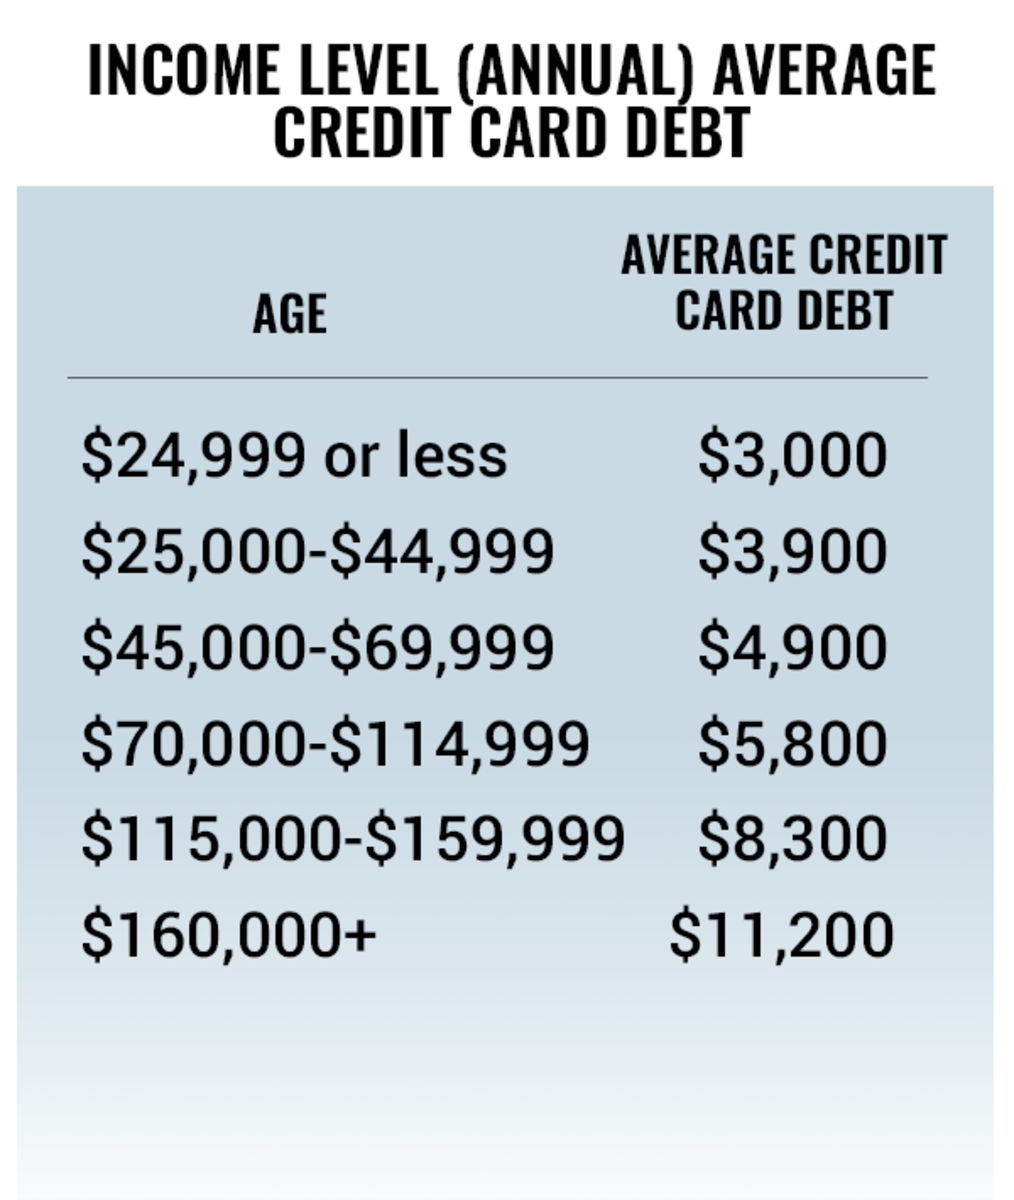 Average Credit Card Debt by Income